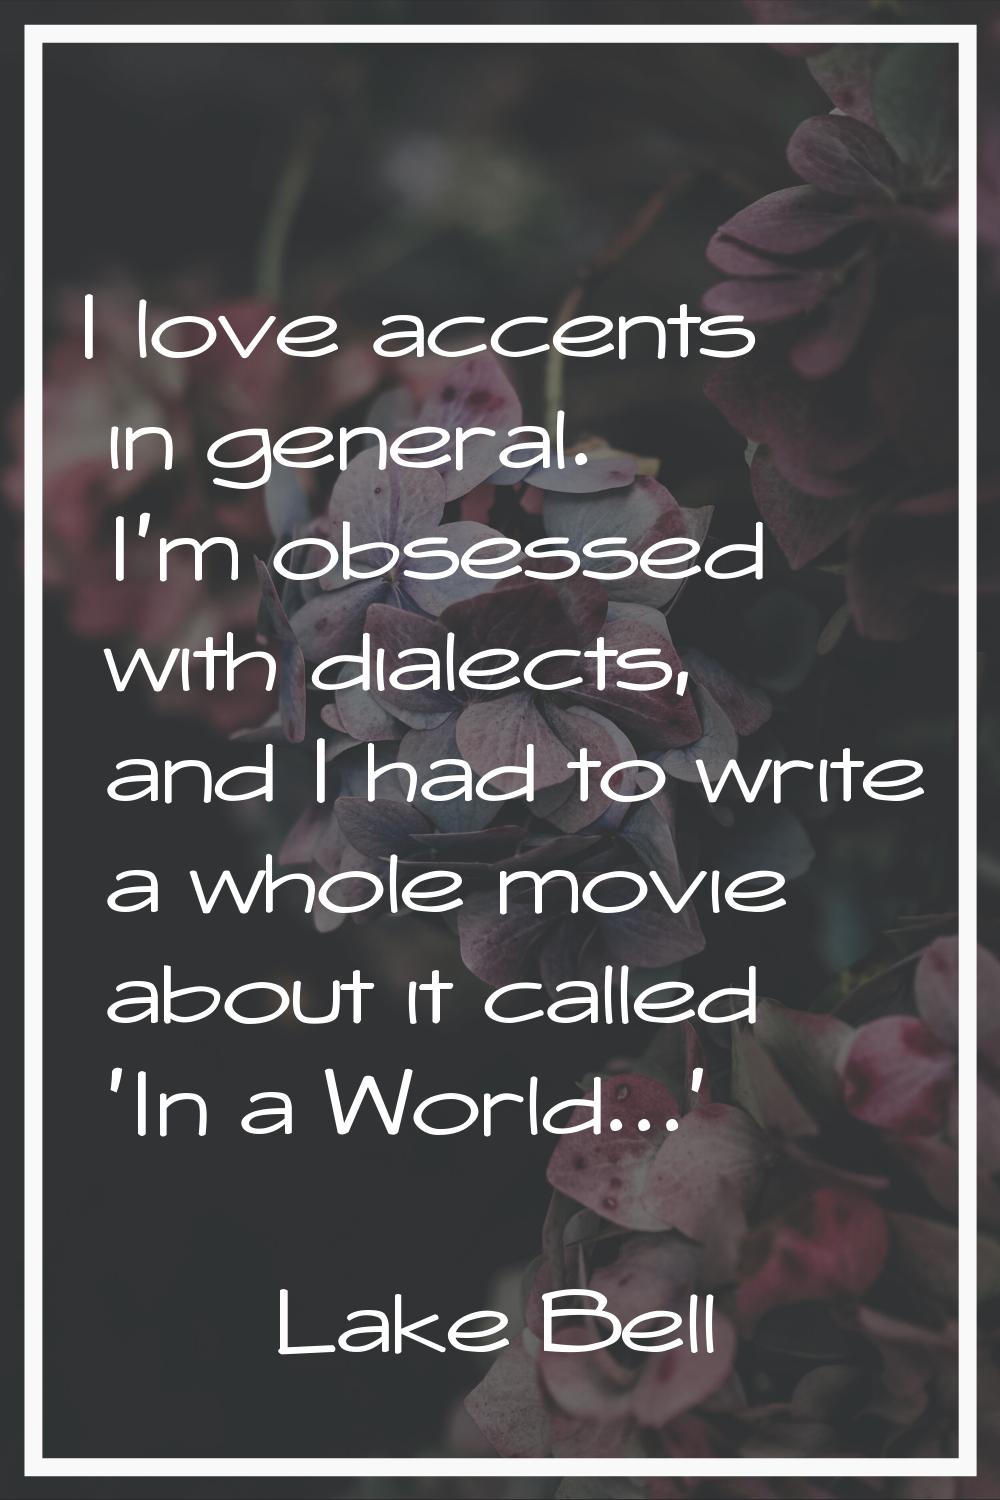 I love accents in general. I'm obsessed with dialects, and I had to write a whole movie about it ca